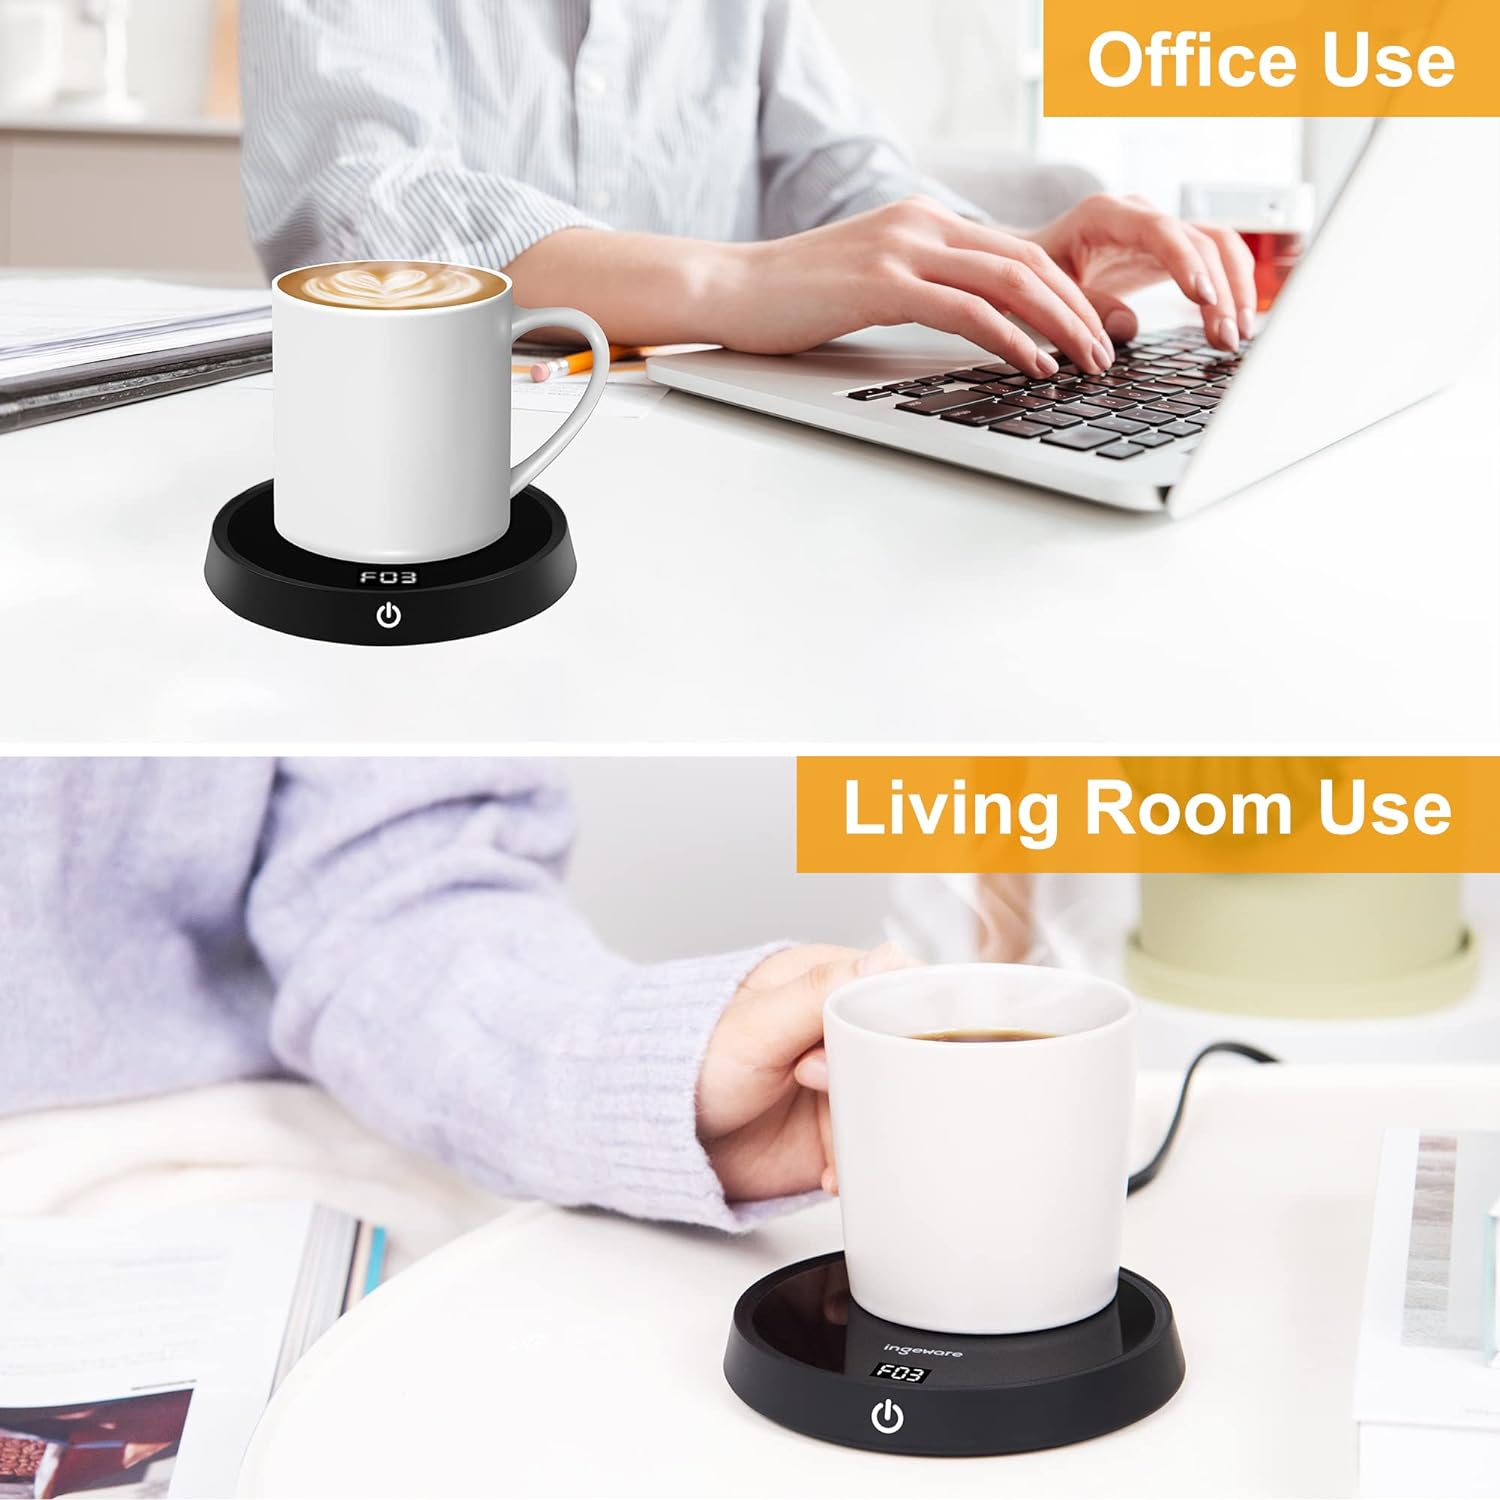 Coffee Mug Warmer, Coffee Warmer for Desk, Coffee Cup Warmer with 3 Temperature Settings & 4 Hours Auto Shut Off, Electric Beverage Warmer for Tea Milk and Cocoa